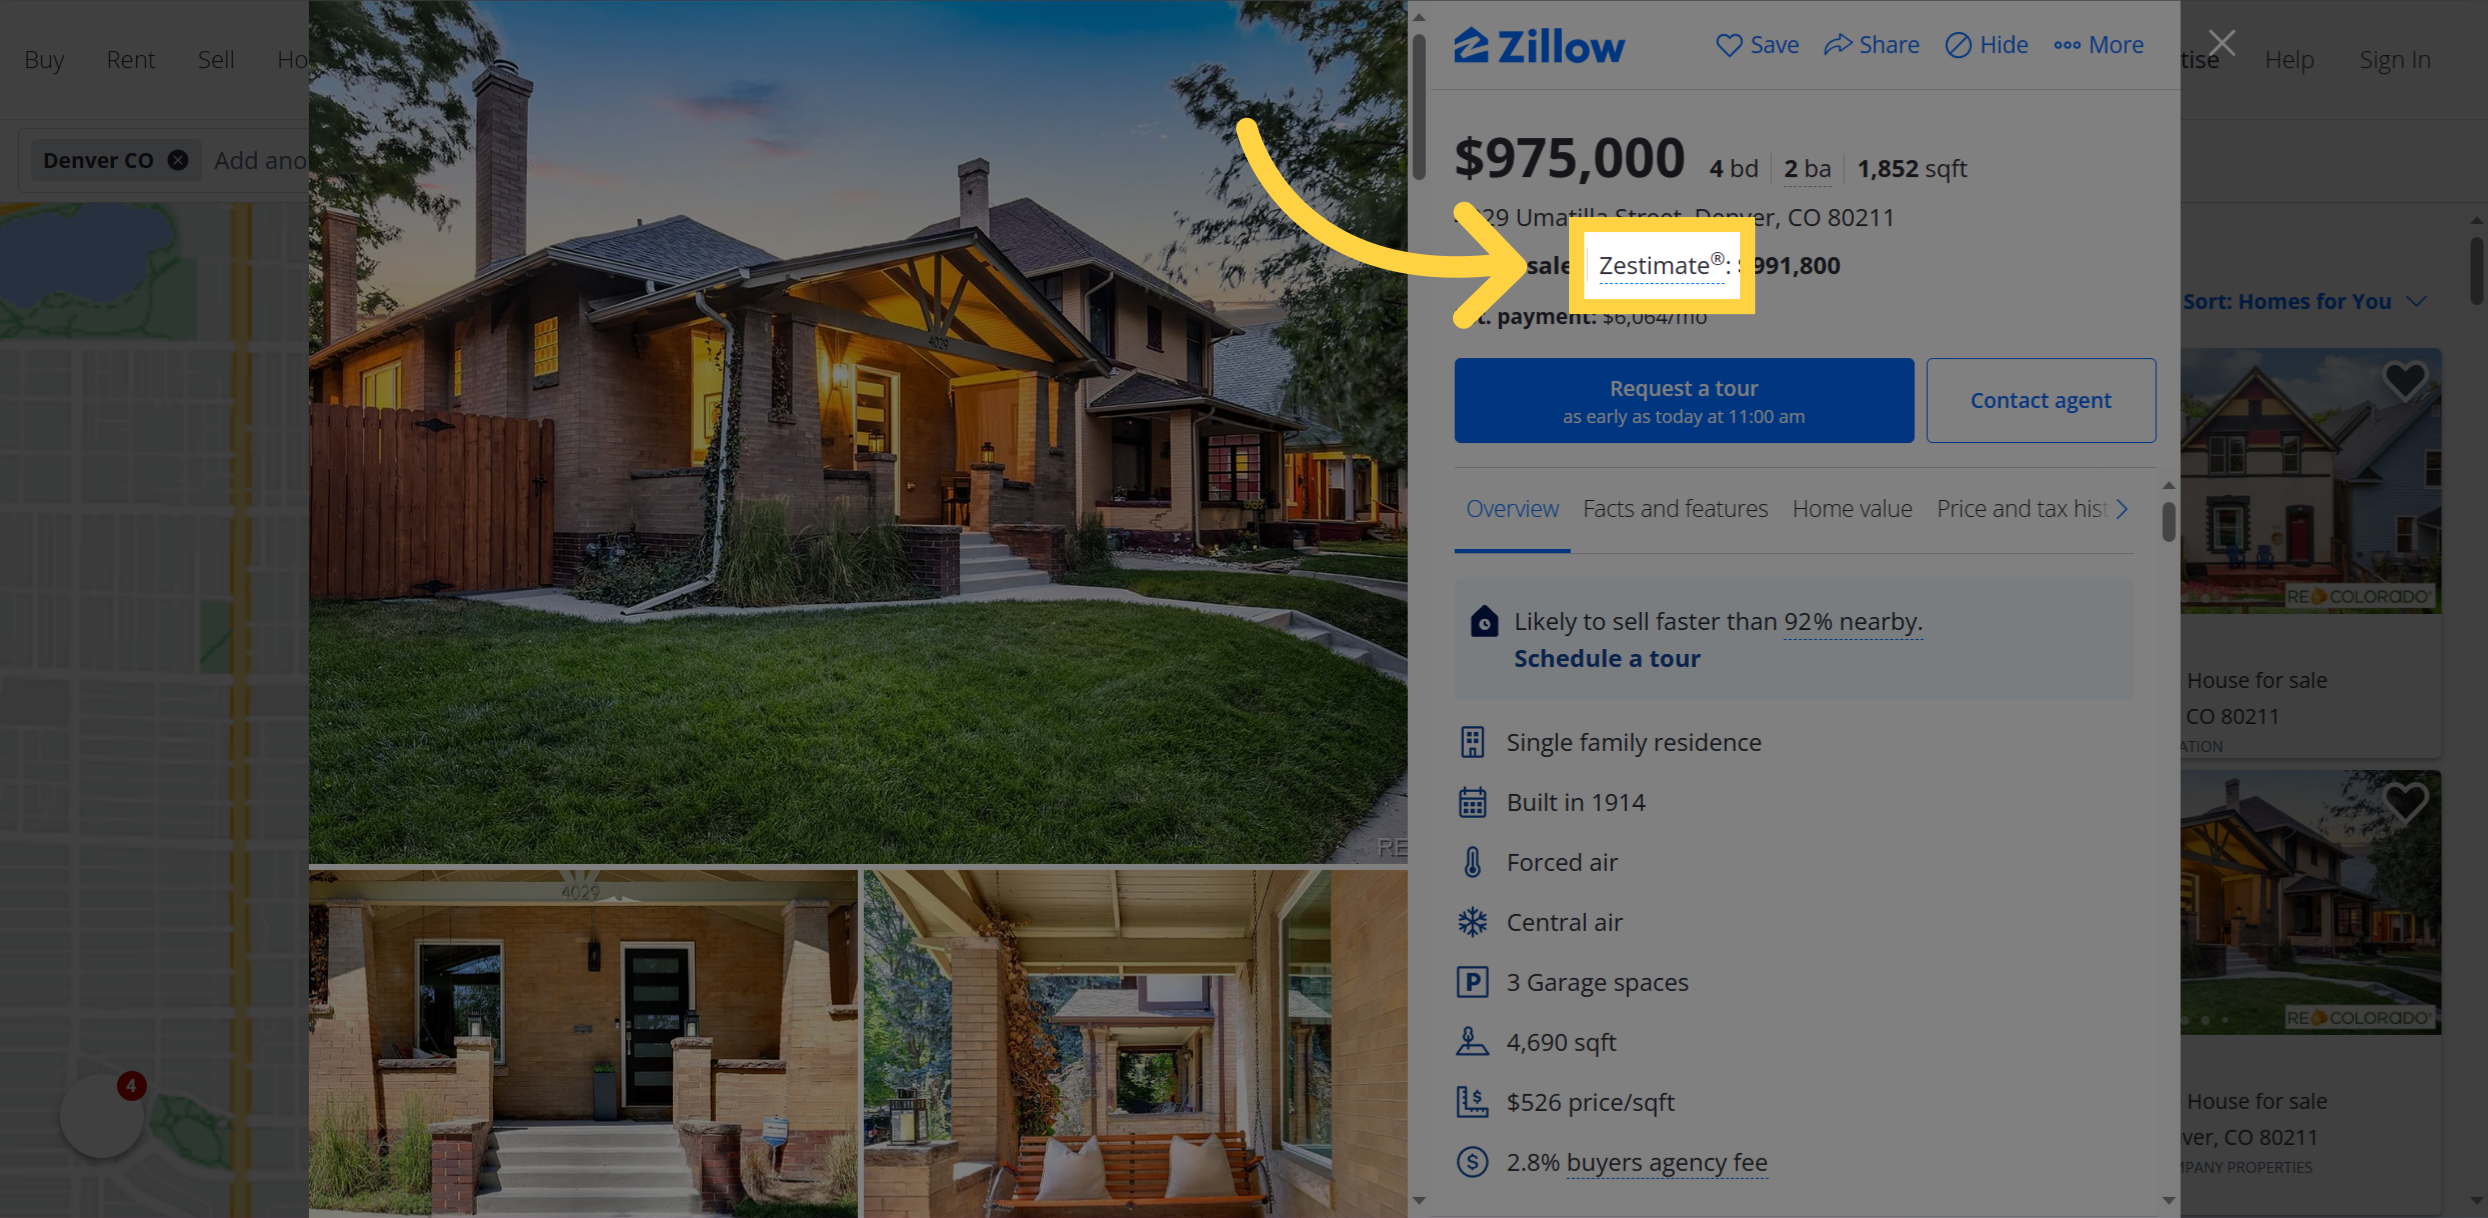 Zestimate® is the Zillow estimate of your home value